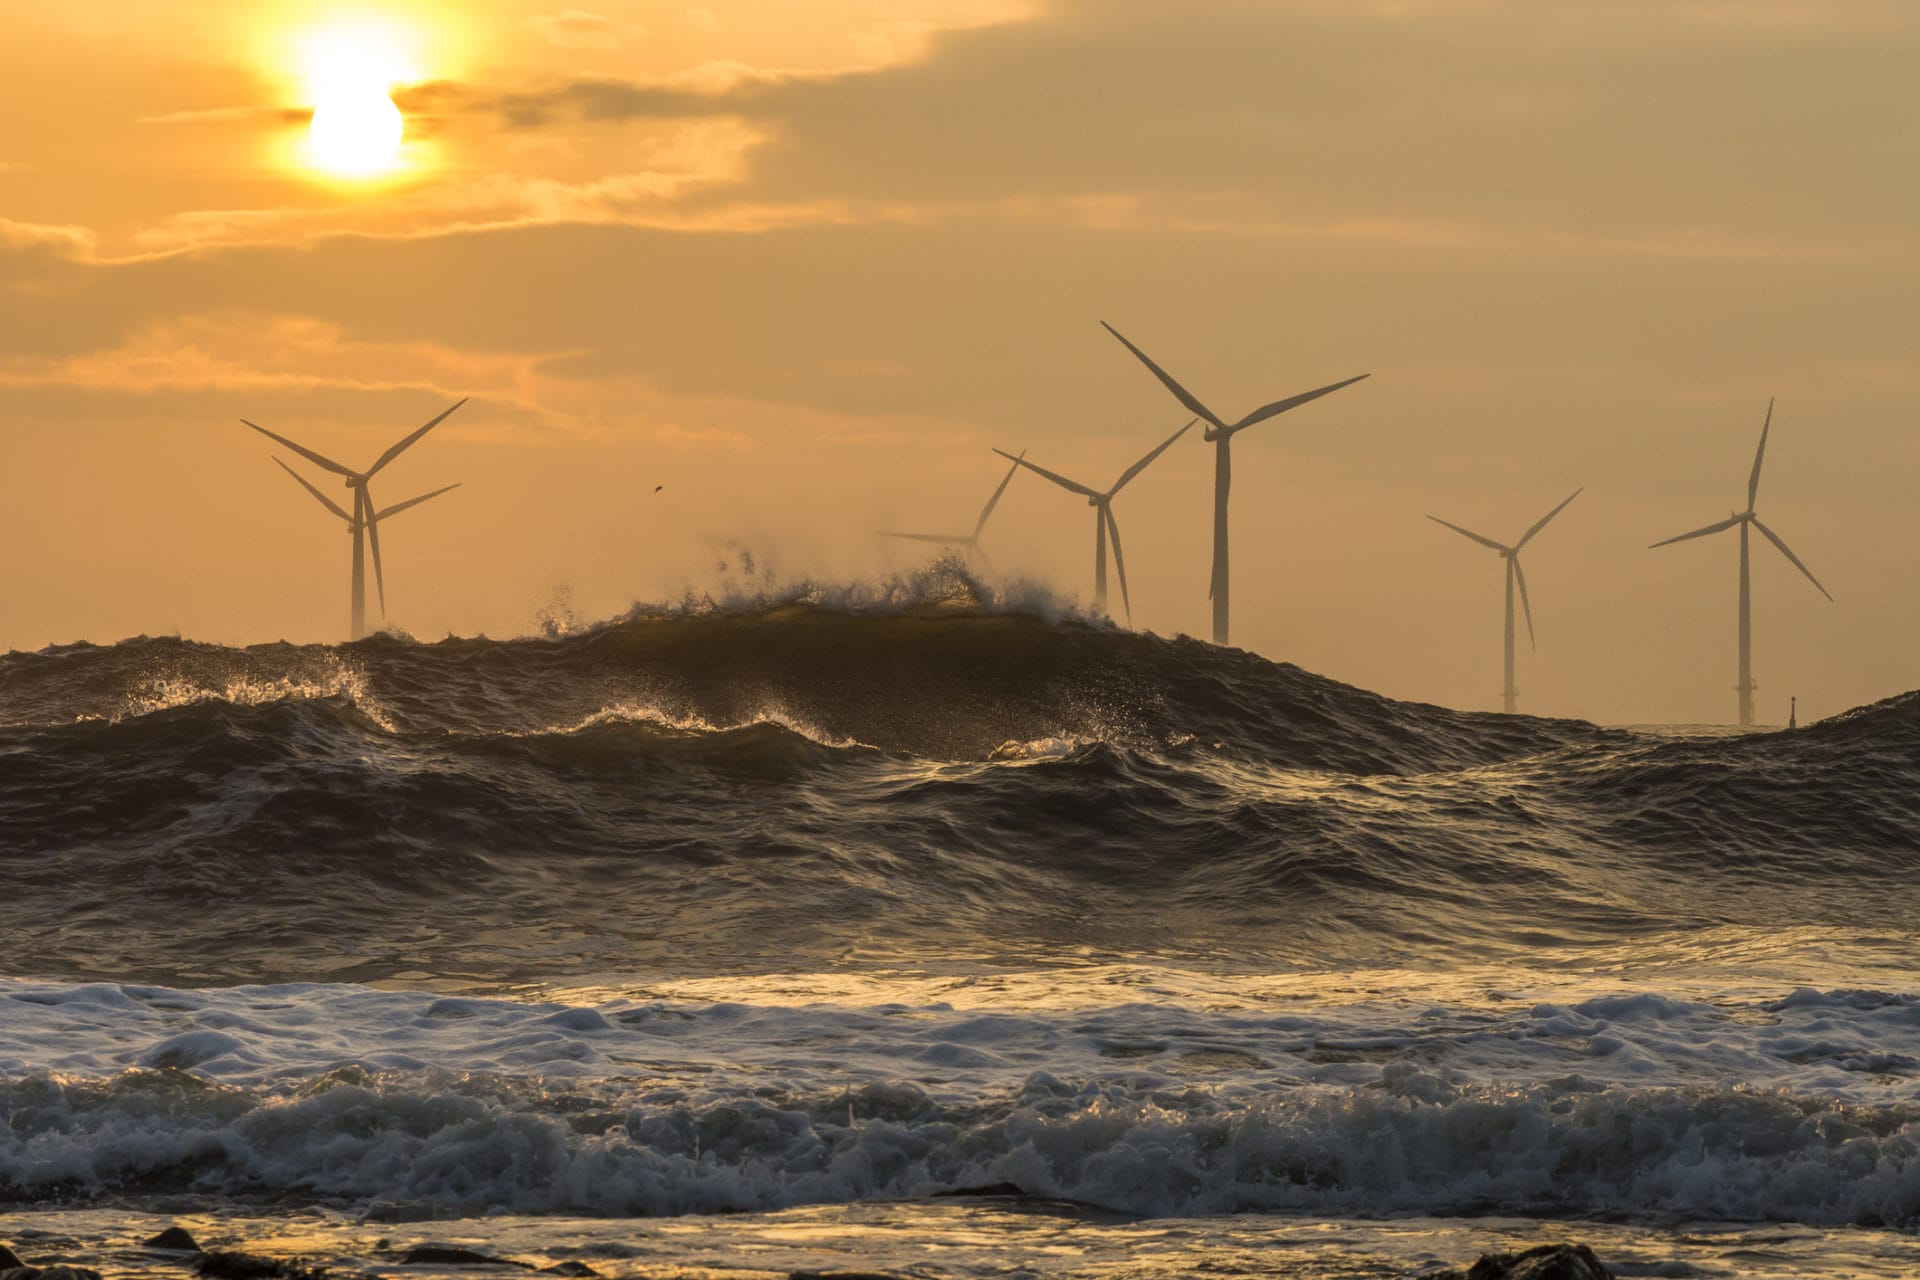 Offshore wind farms paid 'measly' sum to communities